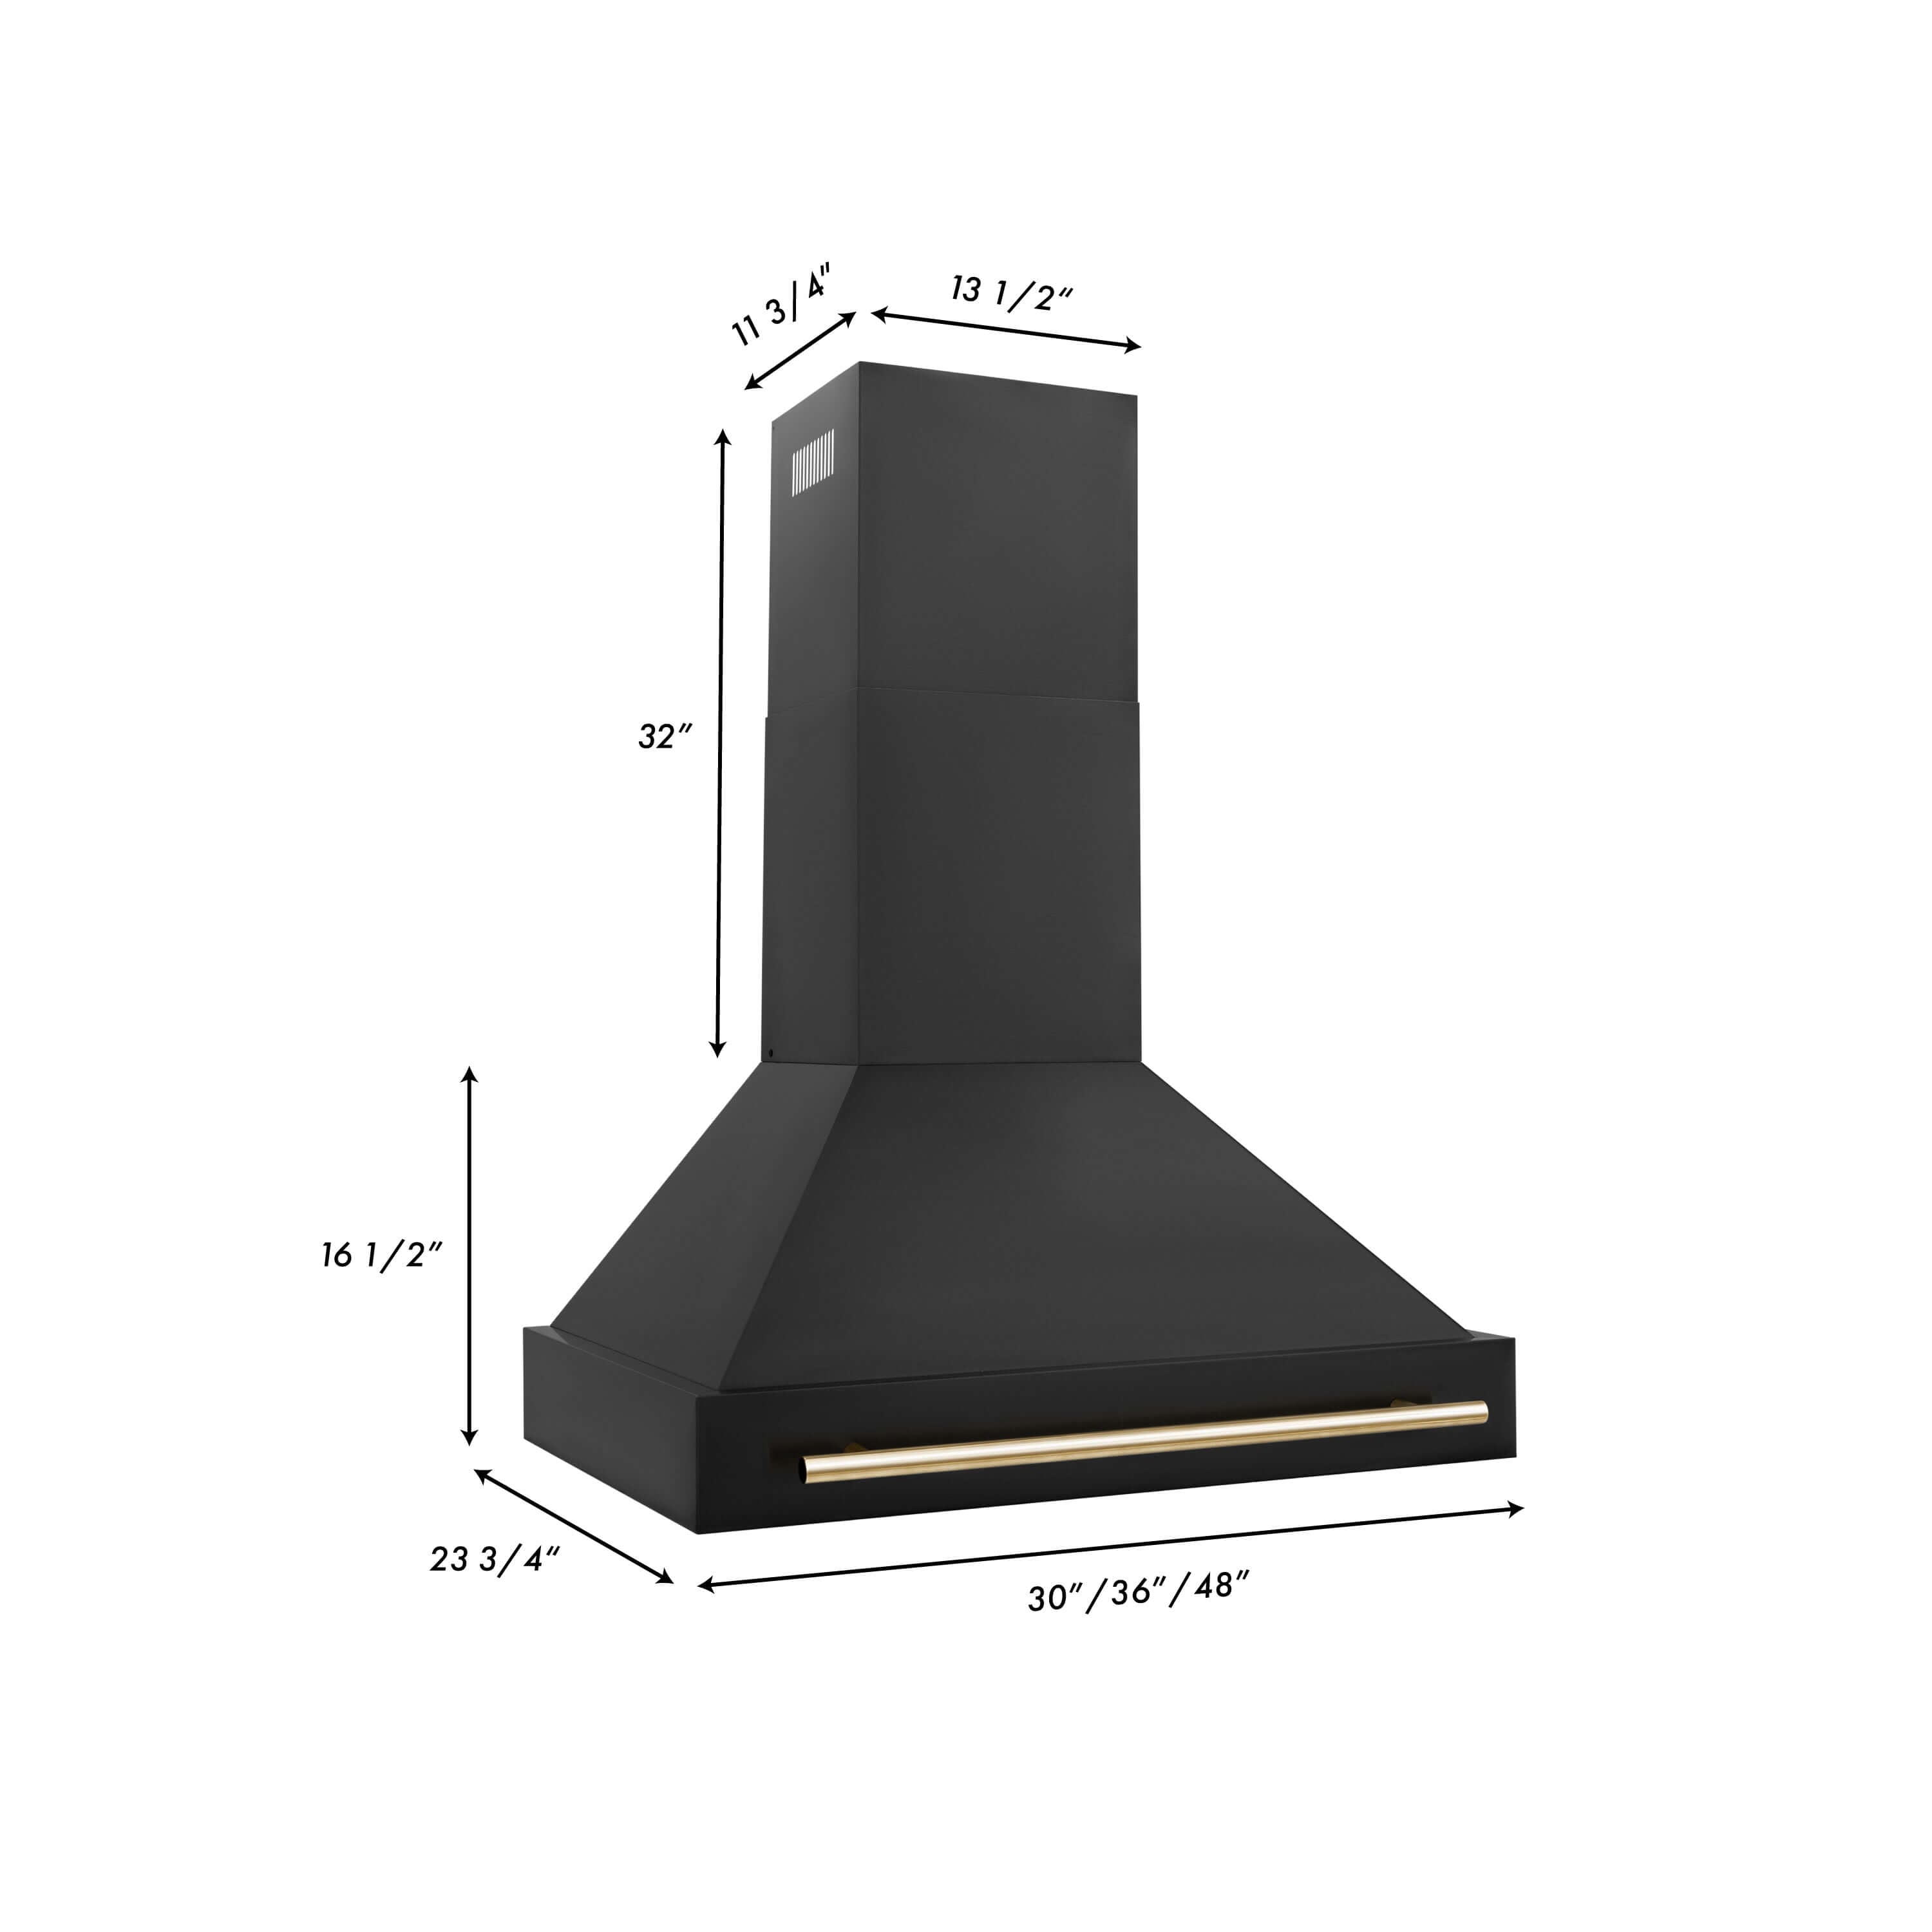 ZLINE Autograph Edition 36 in. Kitchen Package with Black Stainless Steel Dual Fuel Range, Range Hood, Dishwasher, and French Door Refrigerator with Polished Gold Accents (4AKPR-RABRHDWV36-G) dimensional diagram with measurements.